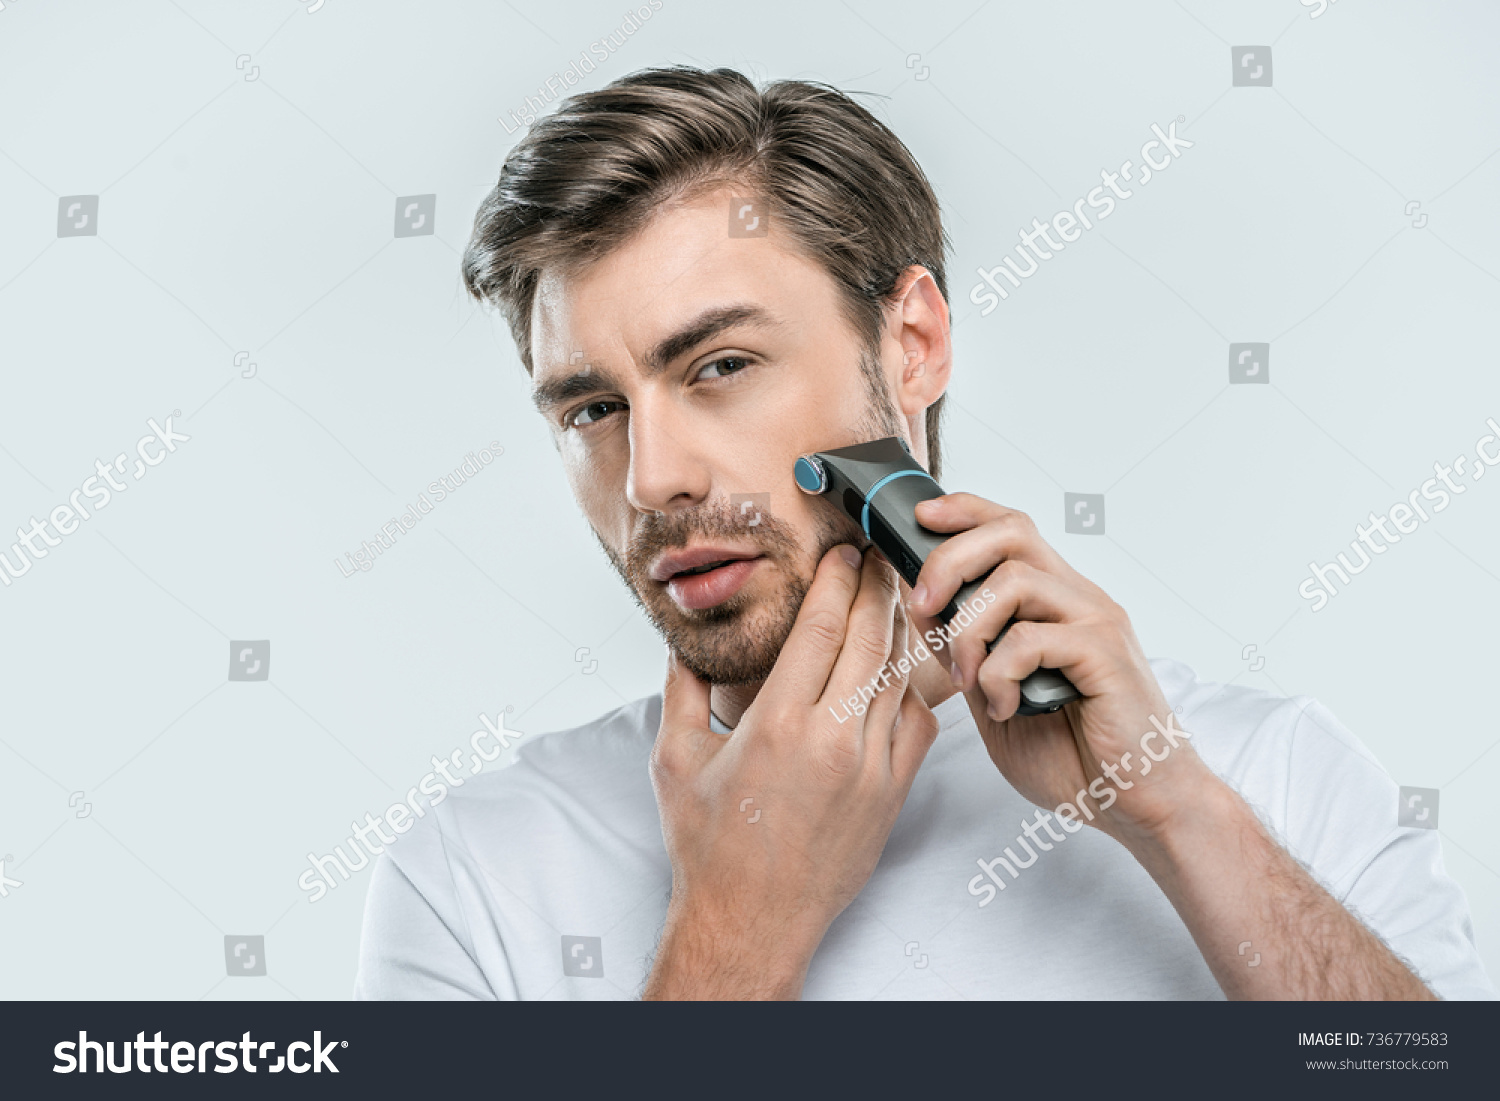 handsome man using electric razor, isolated on grey #736779583